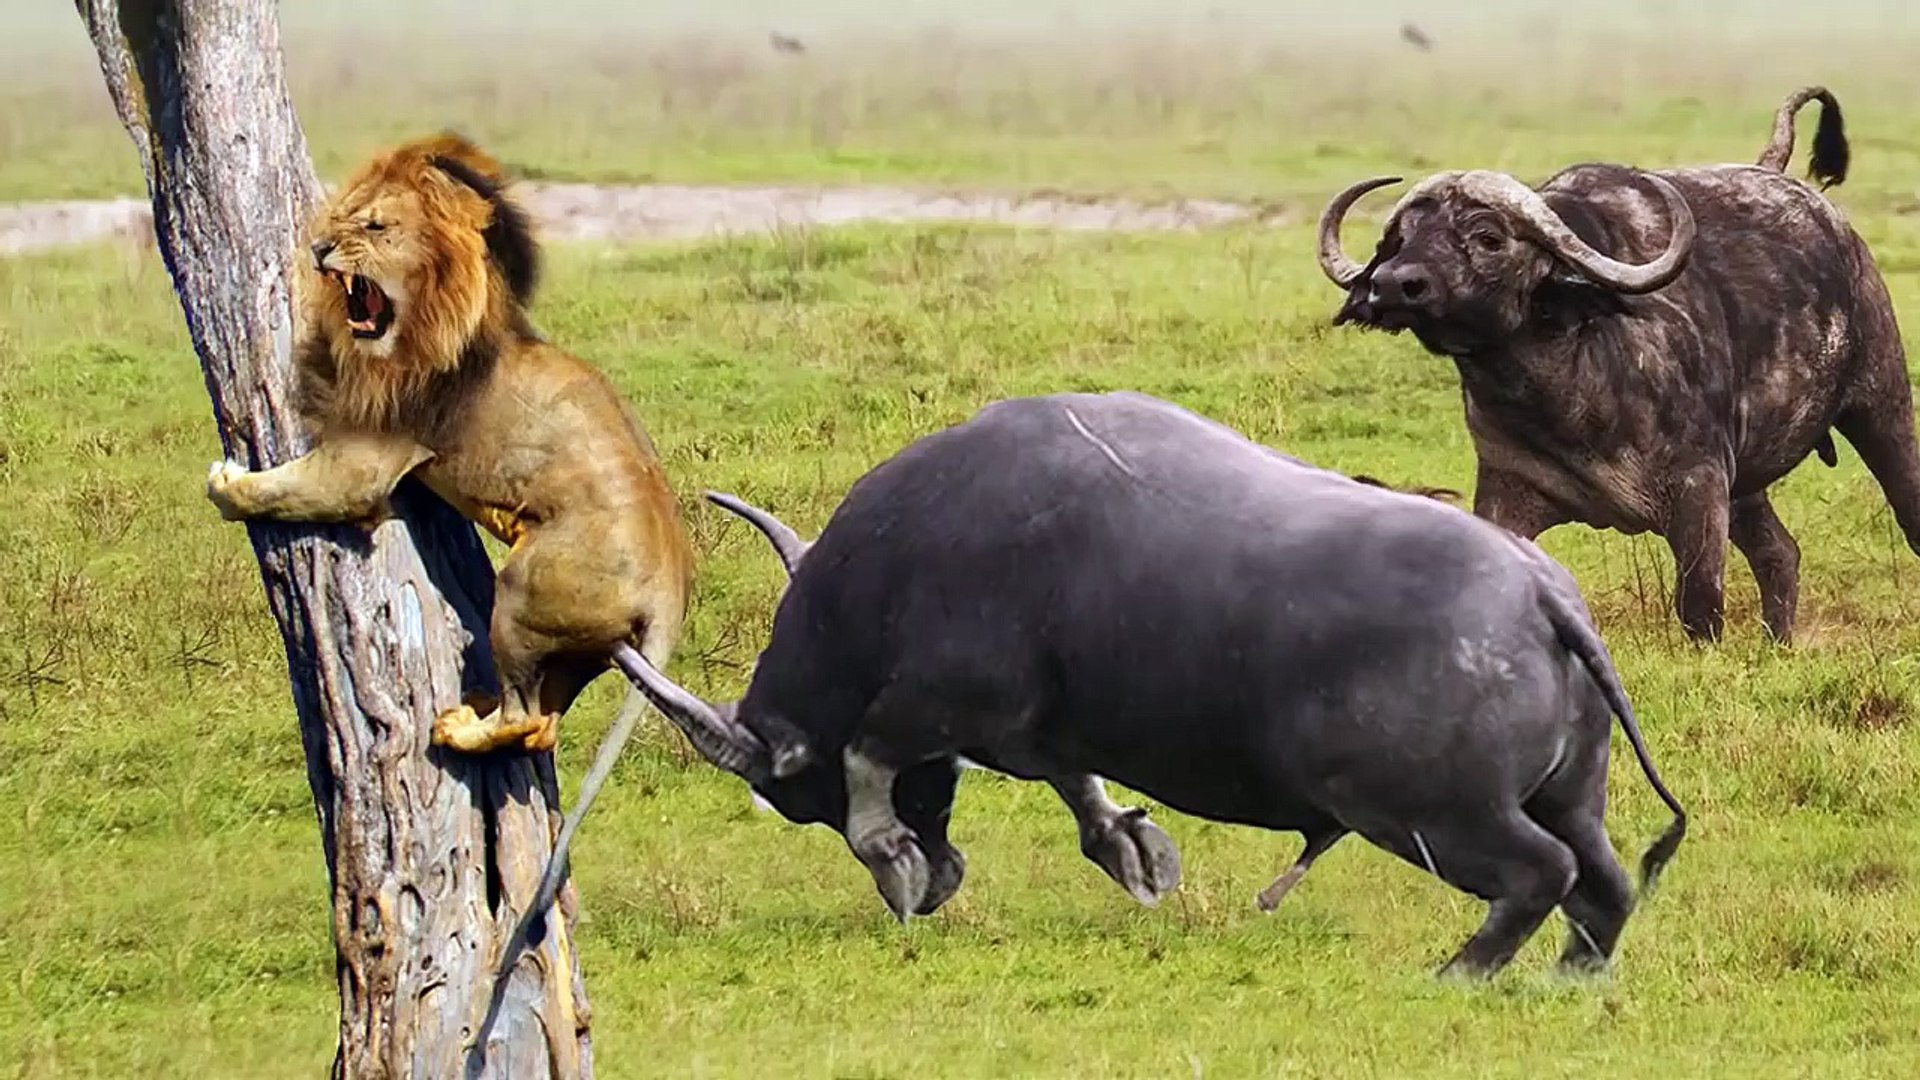 Lion Vs 2 buffaloes, see how a loyal buffalo saved his friend with no fear  - video Dailymotion